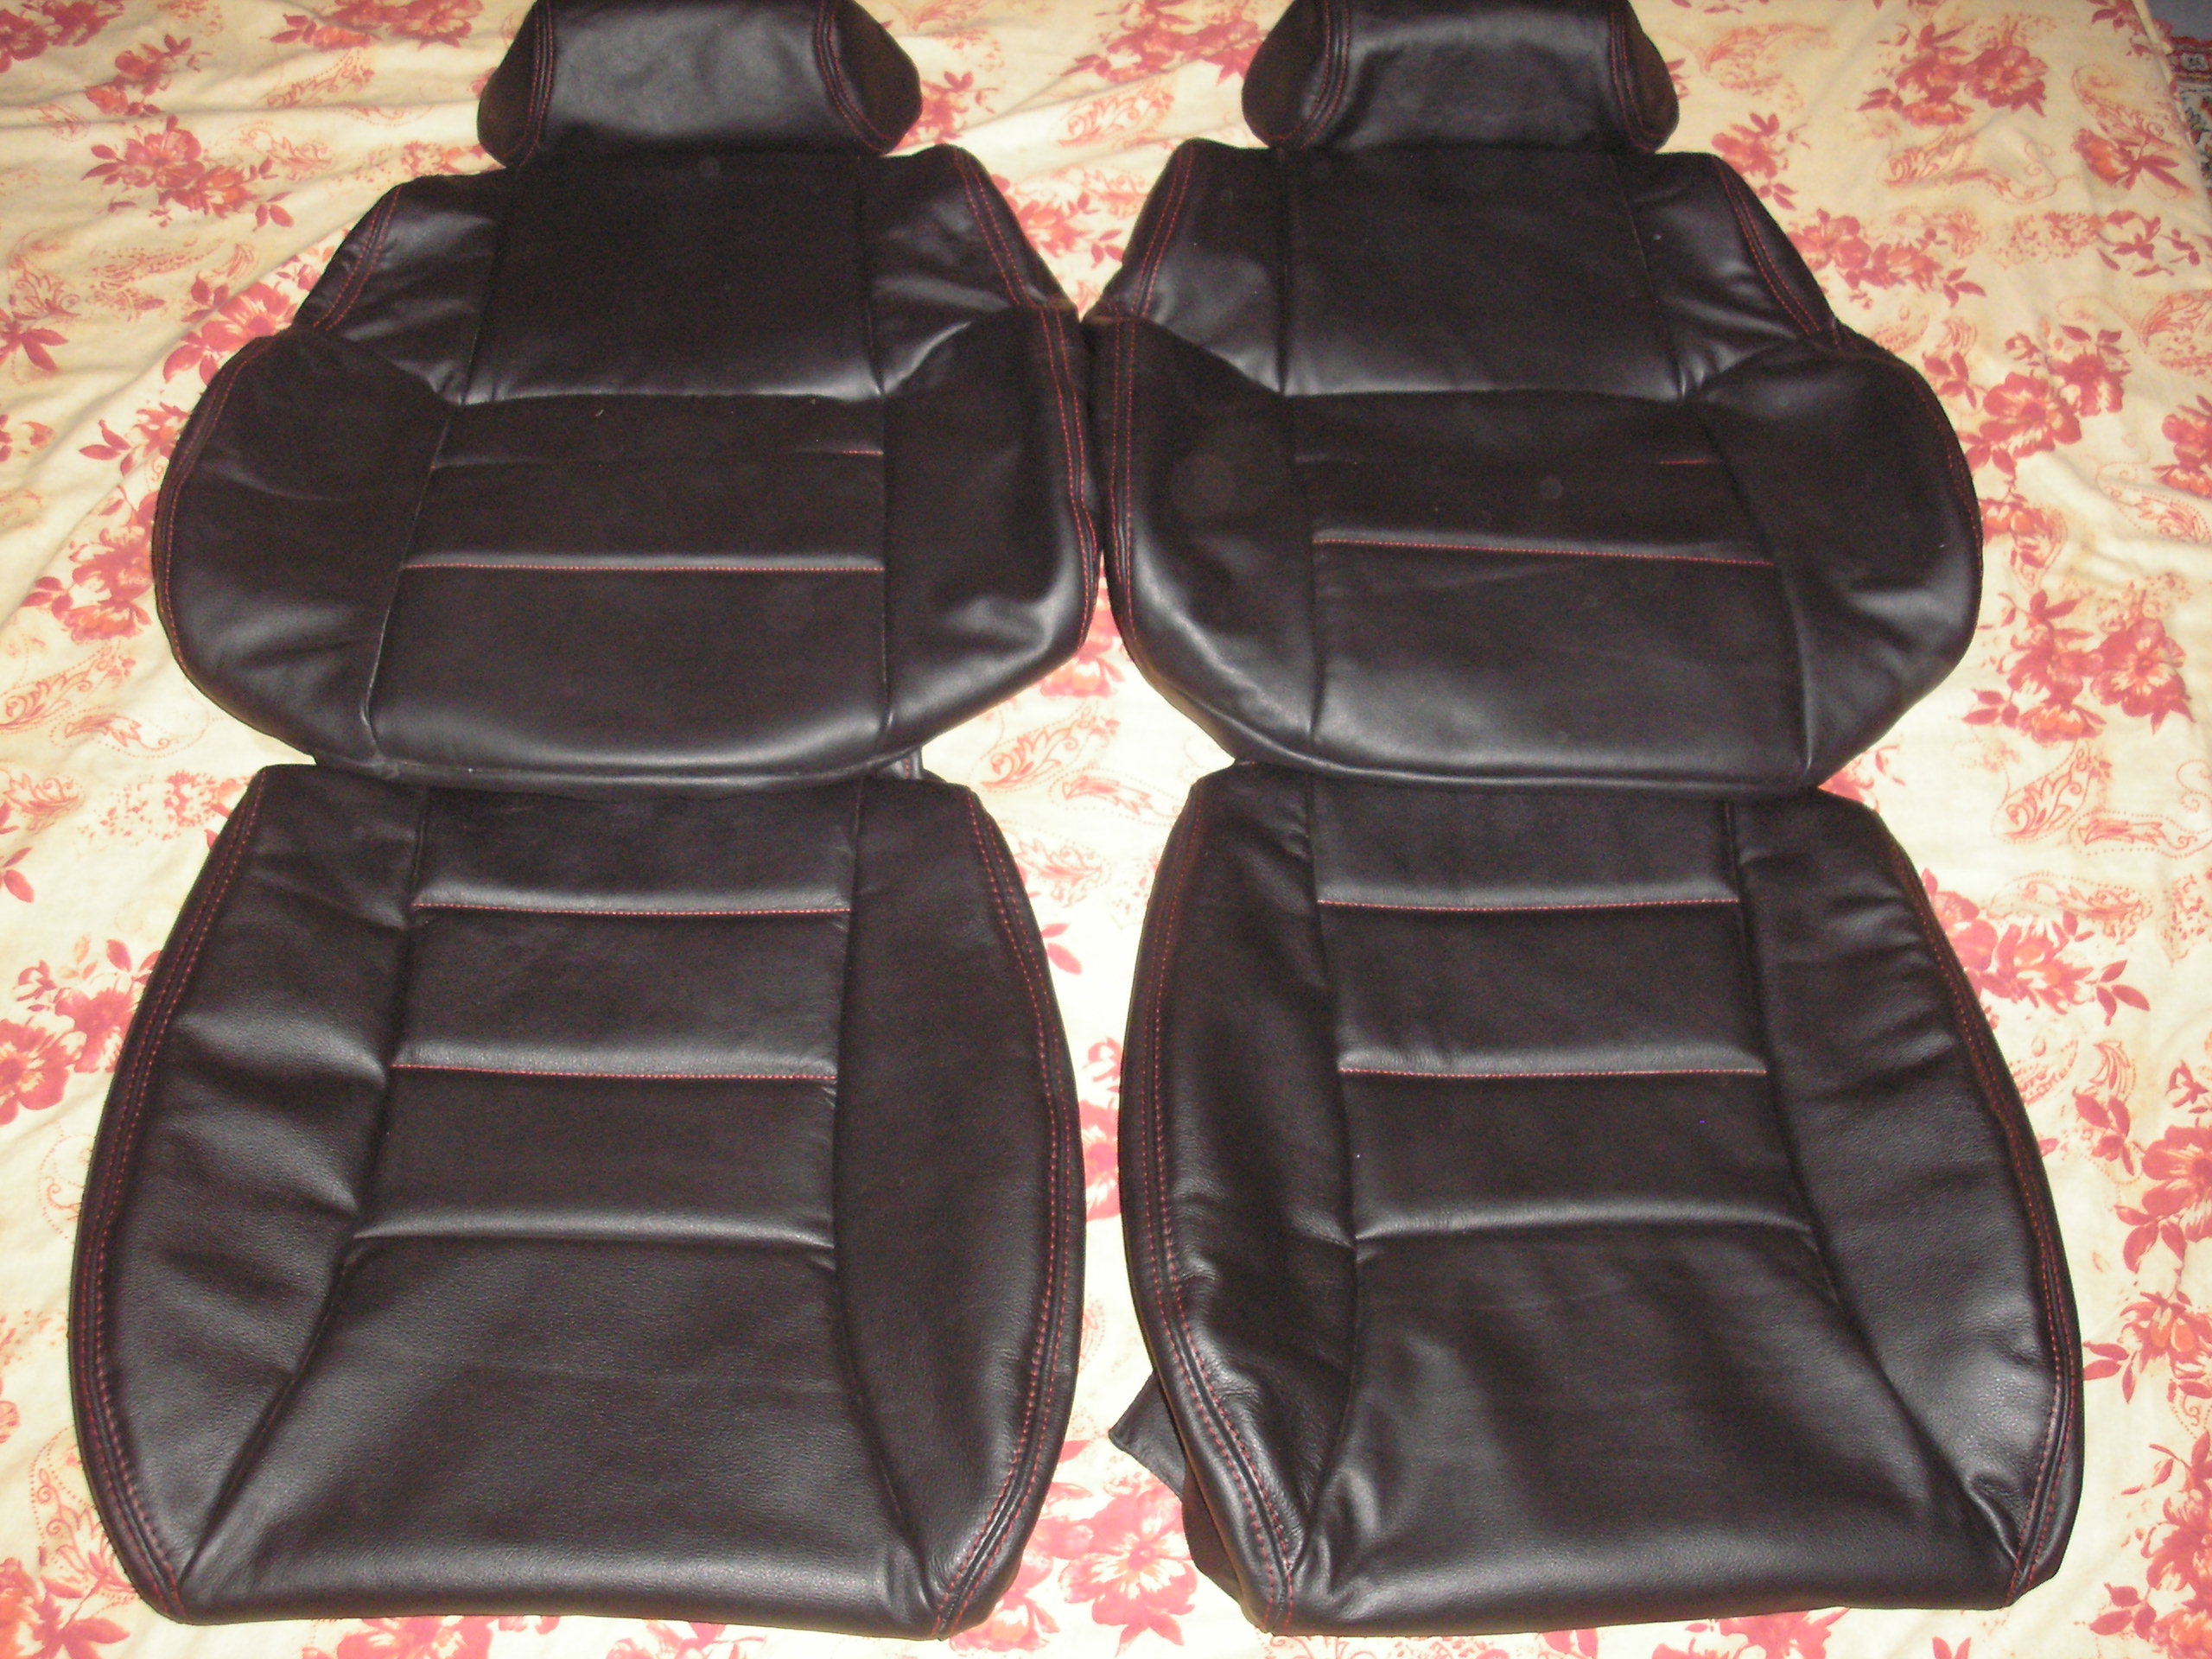 Nissan 300zx leather seat covers #8